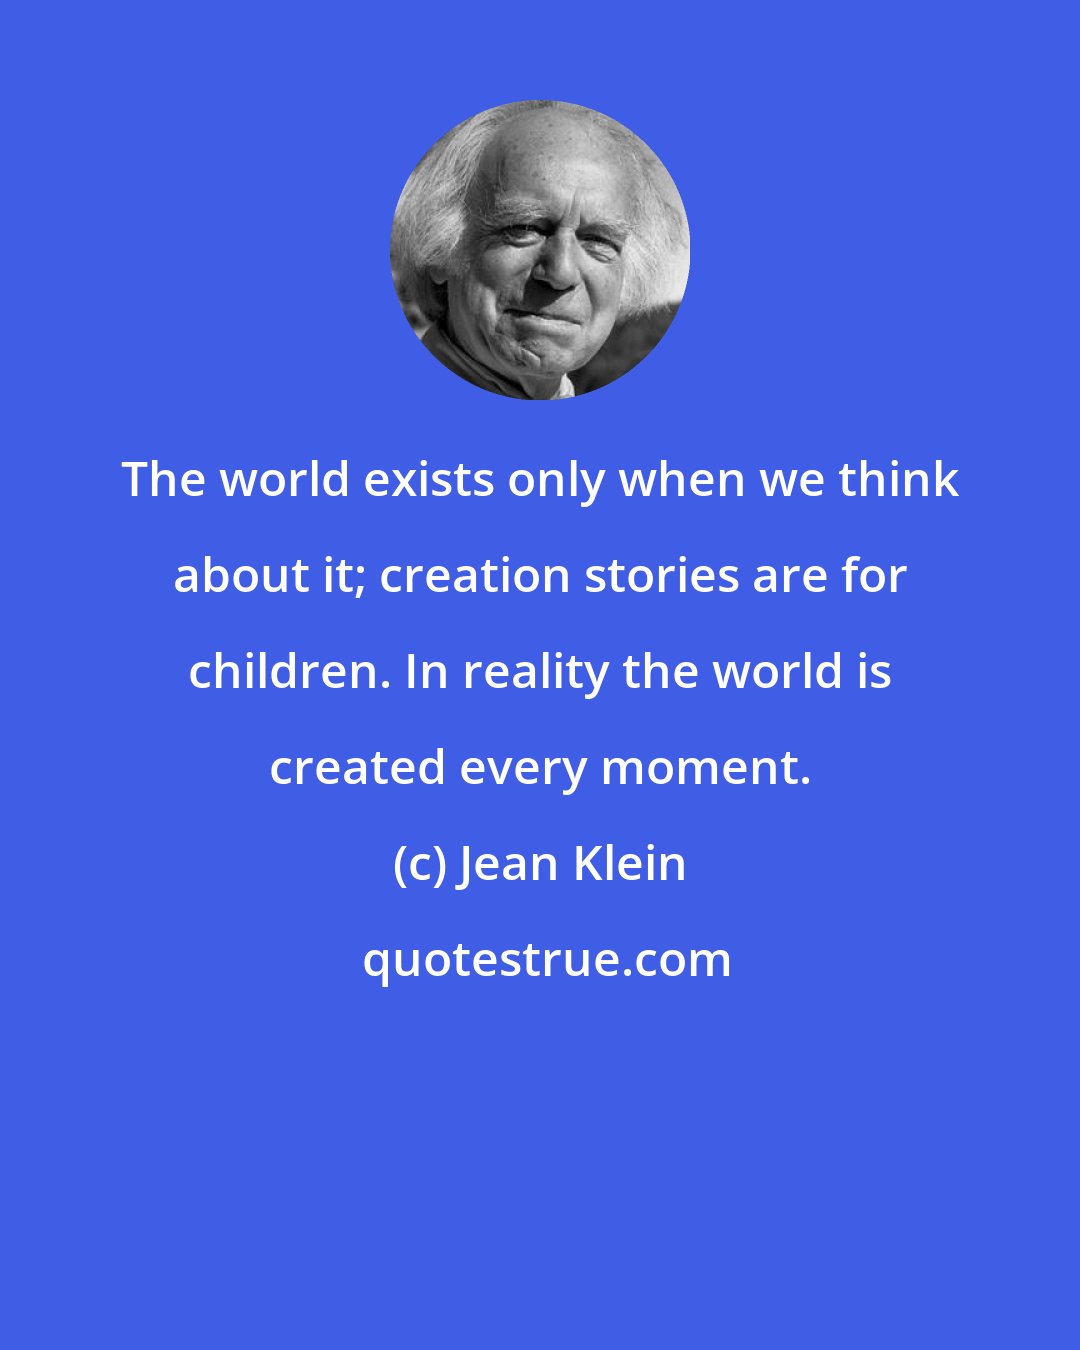 Jean Klein: The world exists only when we think about it; creation stories are for children. In reality the world is created every moment.